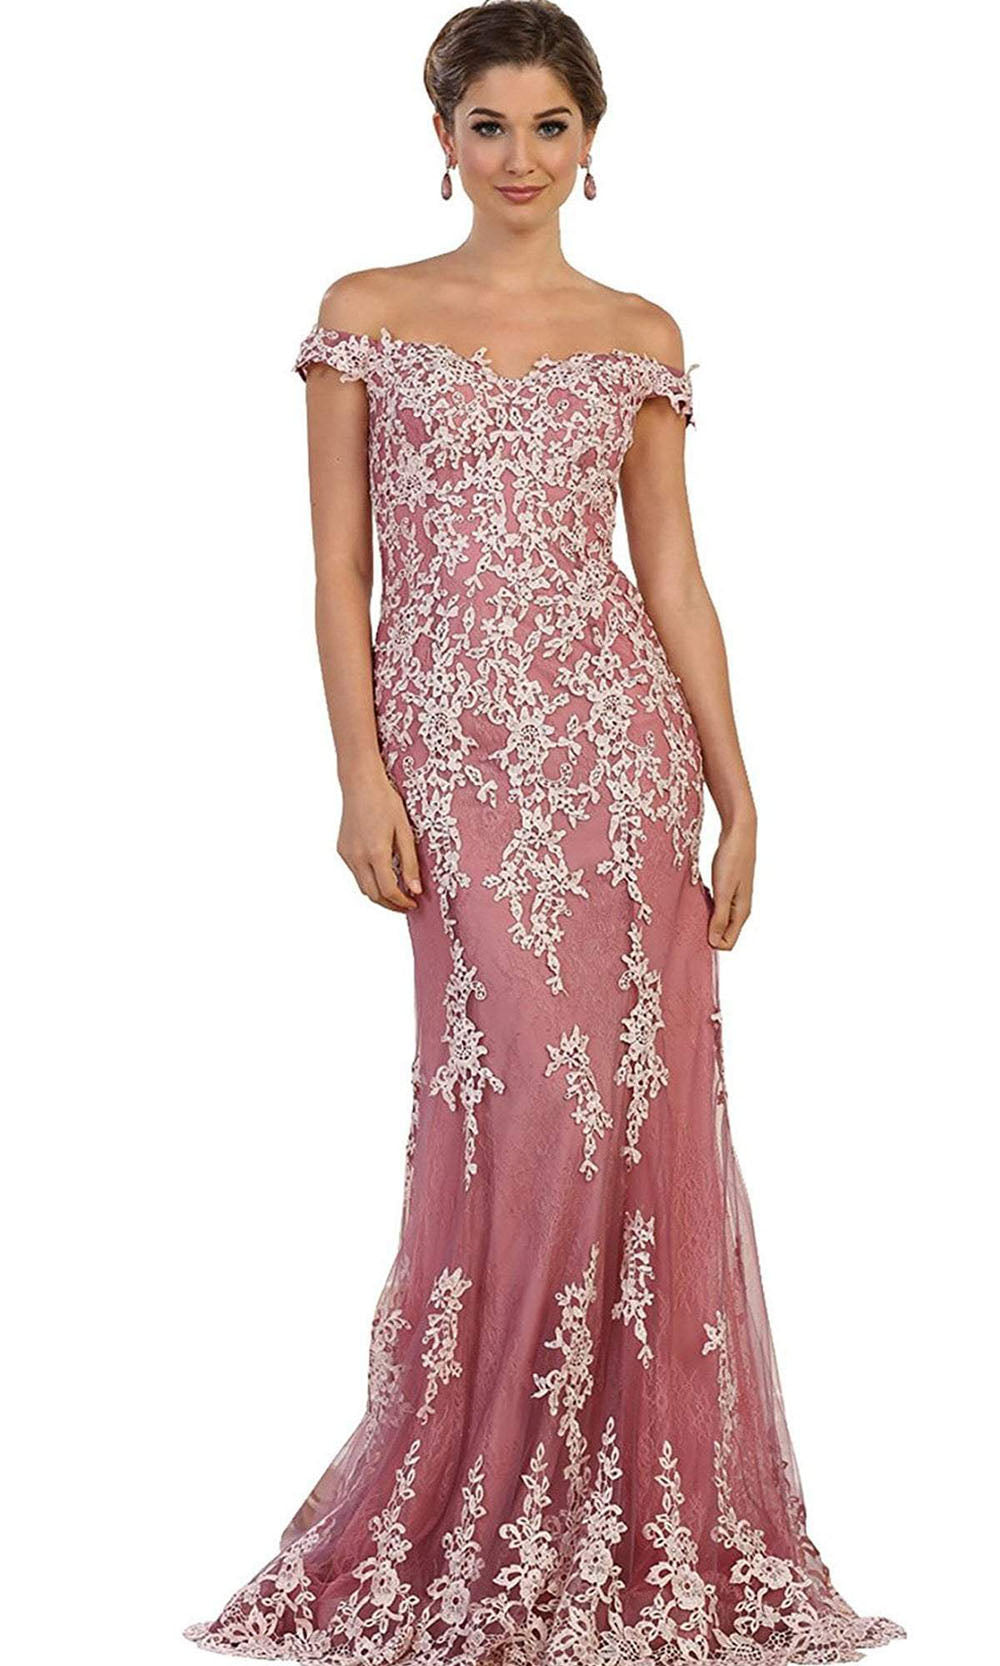 May Queen - Bead Embellished Off-Shoulder Sheath Dress RQ7593 - 1 pc Mauve In Size 10 Available CCSALE 10 / Mauve